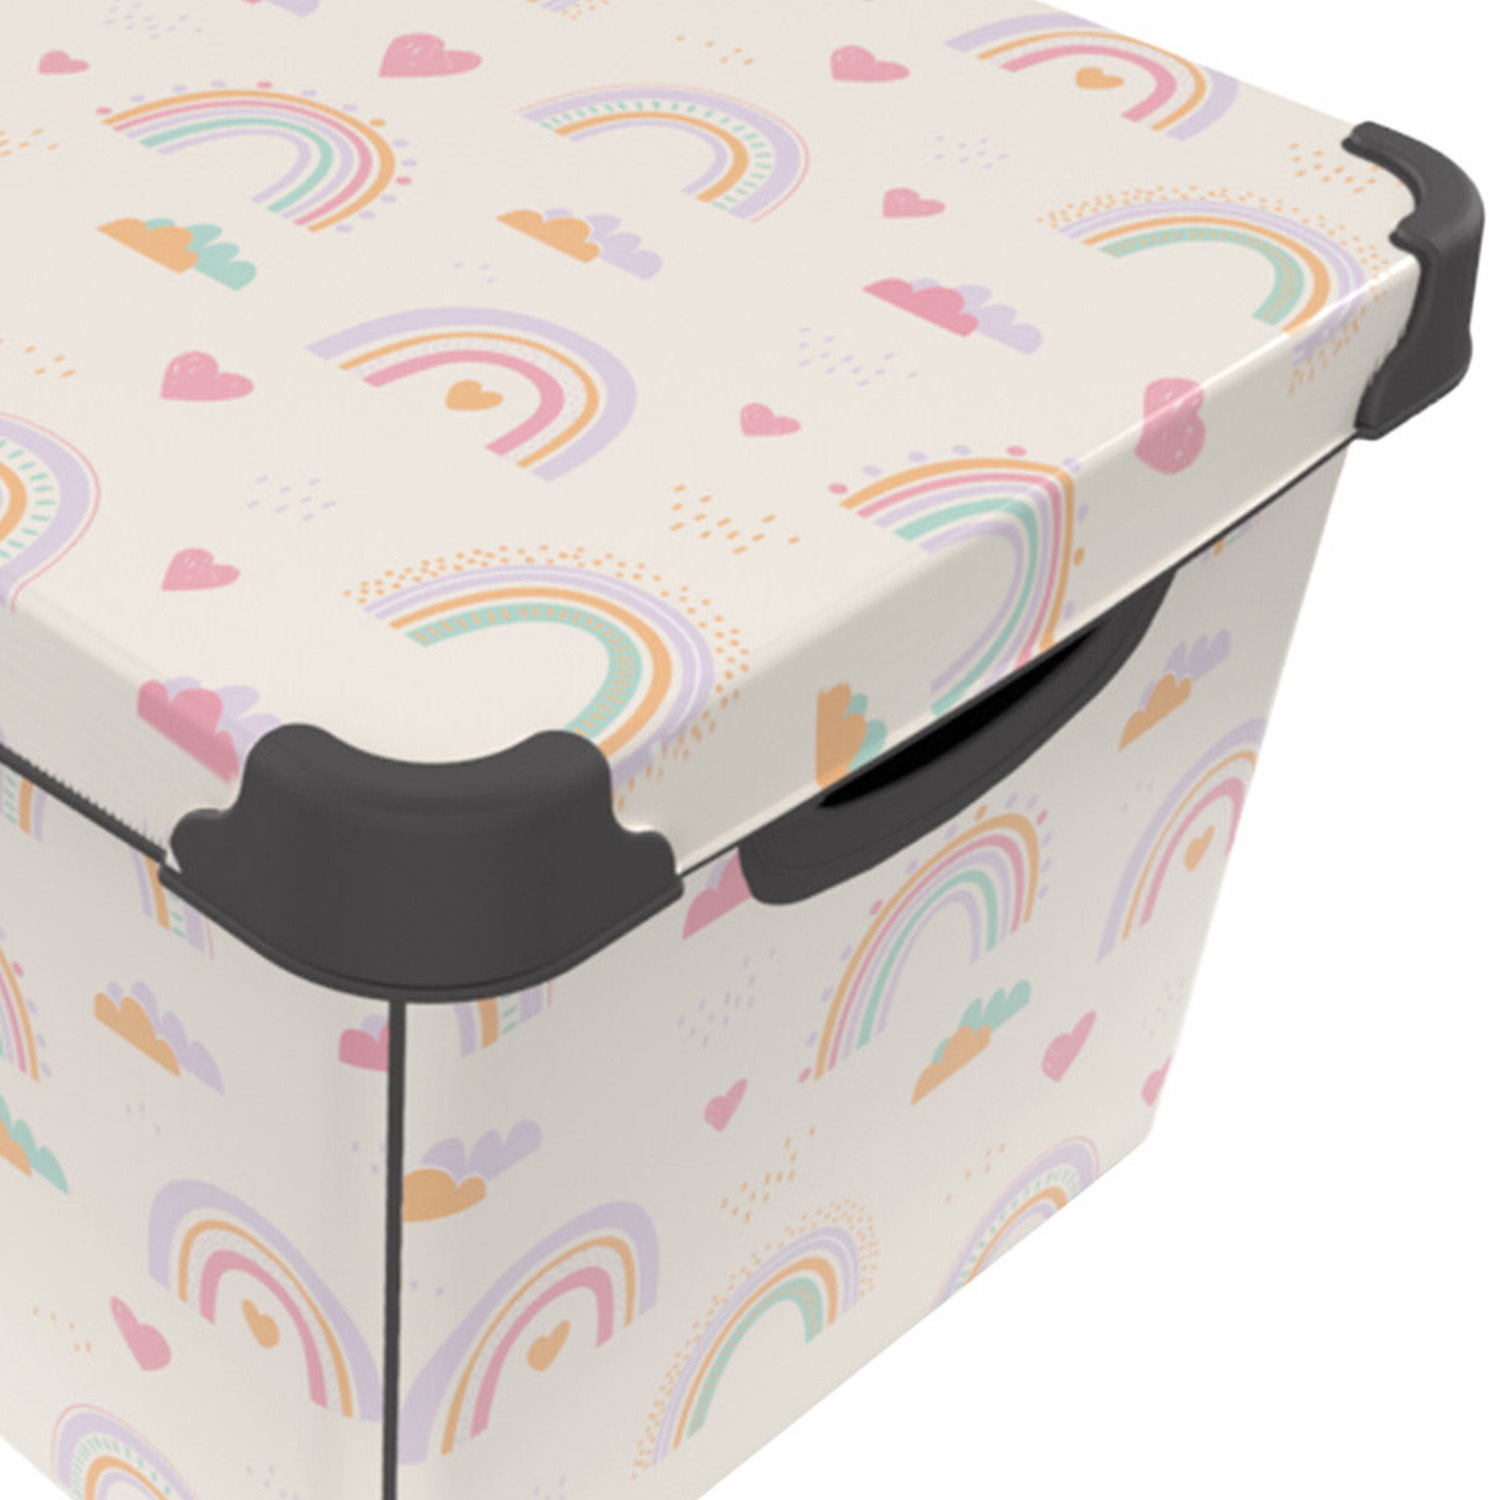 17L Rainbow Patterned Storage Box with Lid Image 2